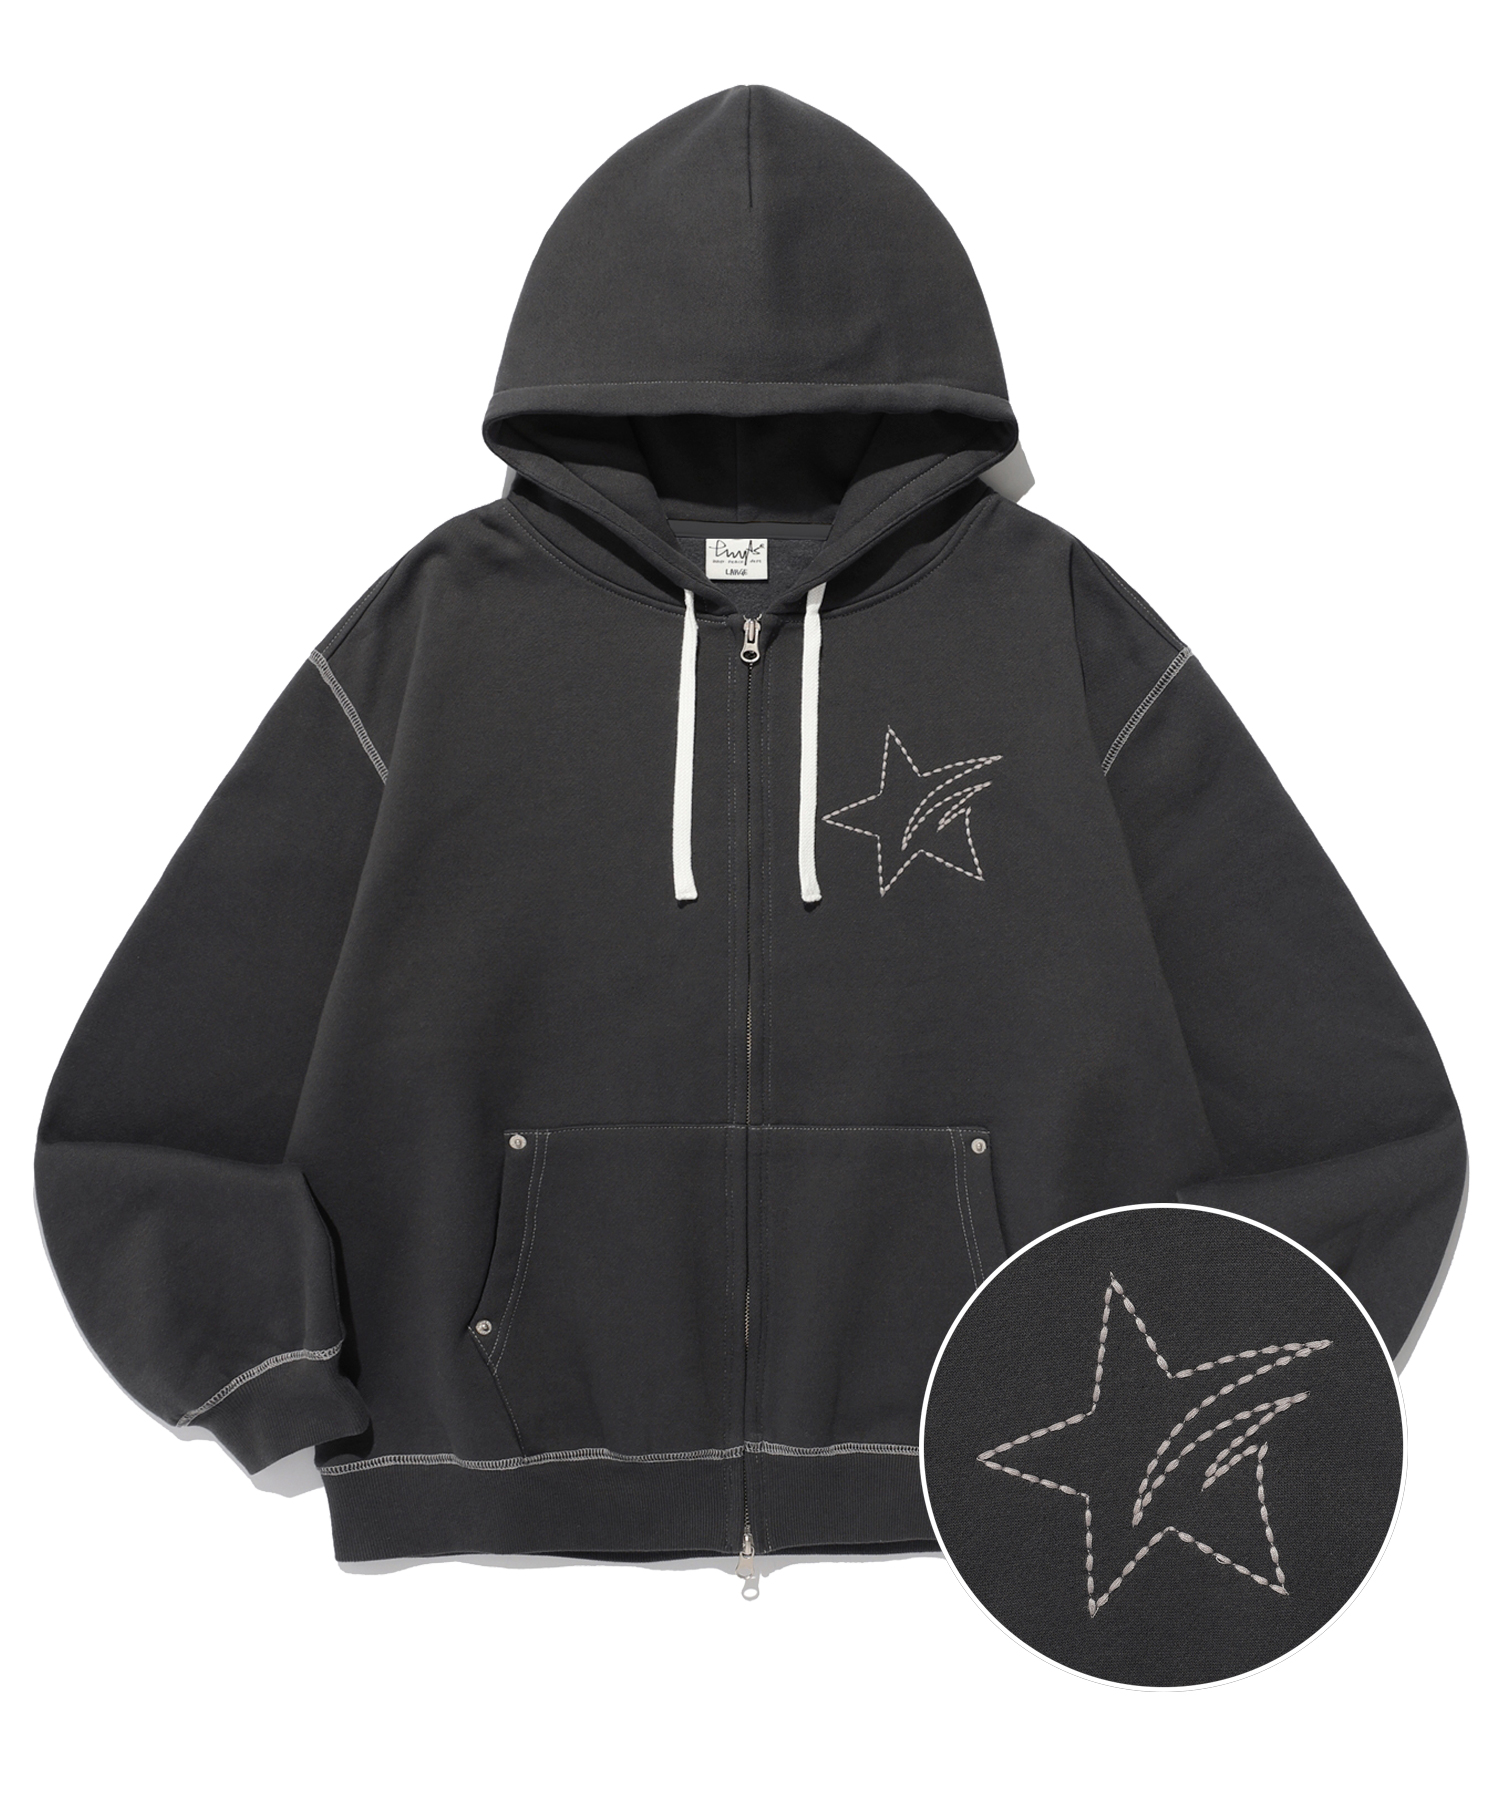 STARDUST STITCH HOODIE ZIP UP BLUE CHARCOAL